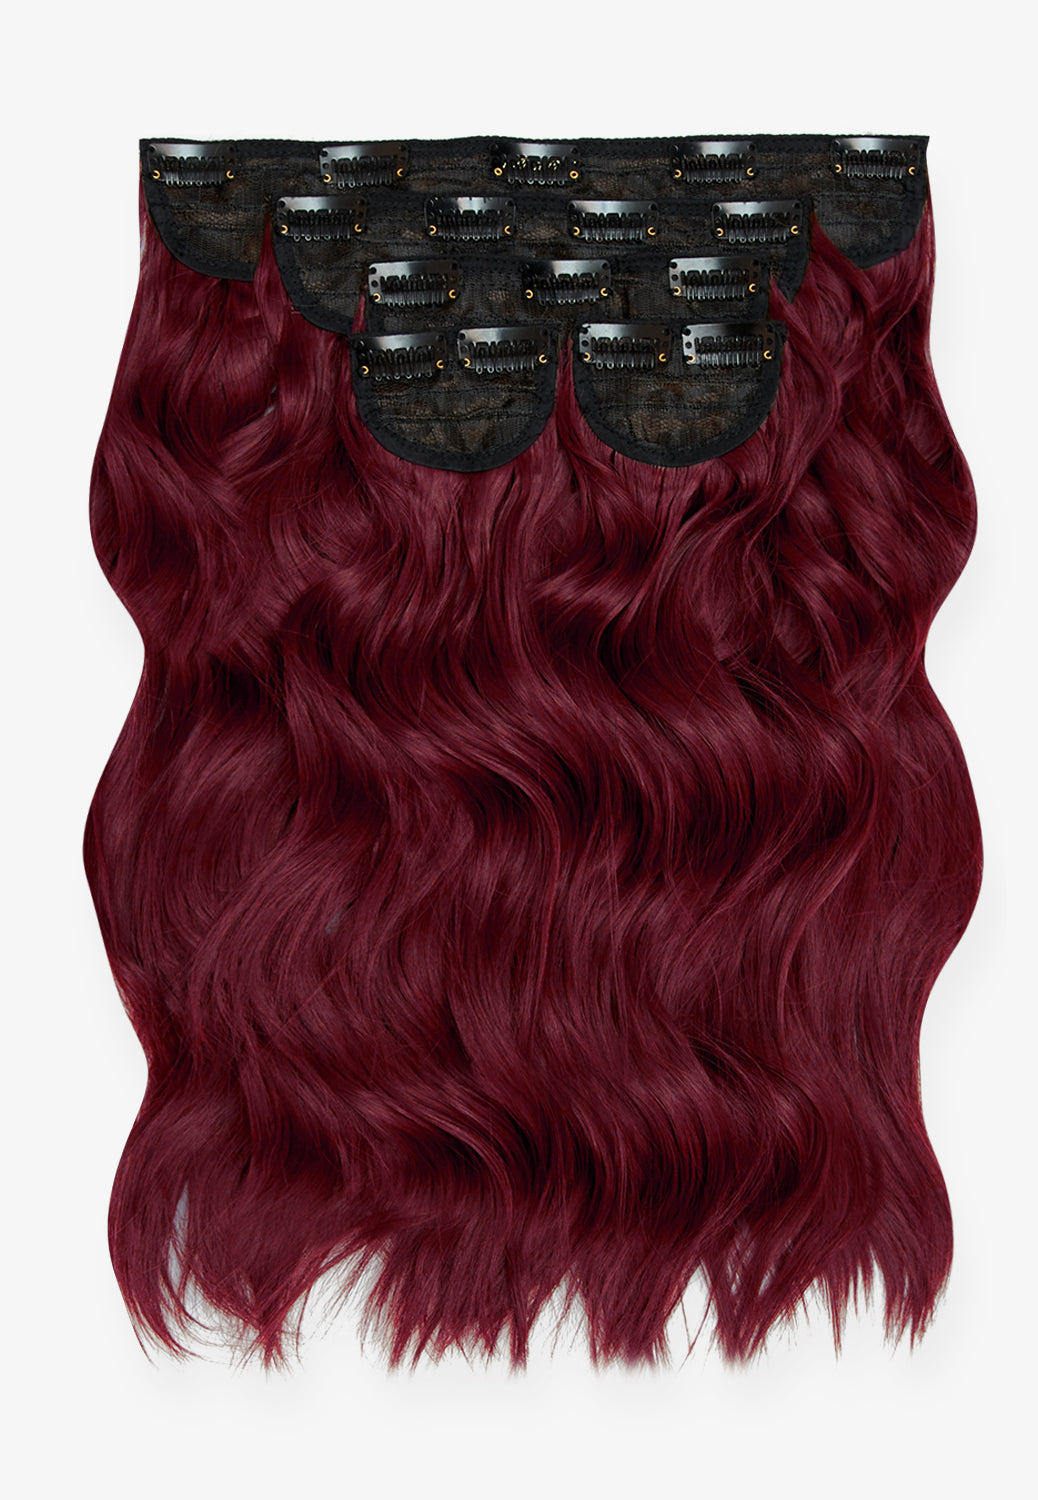 Super Thick 16’’ 5 Piece Brushed Out Wave Clip In Hair Extensions + Hair Care Bundle - Burgundy